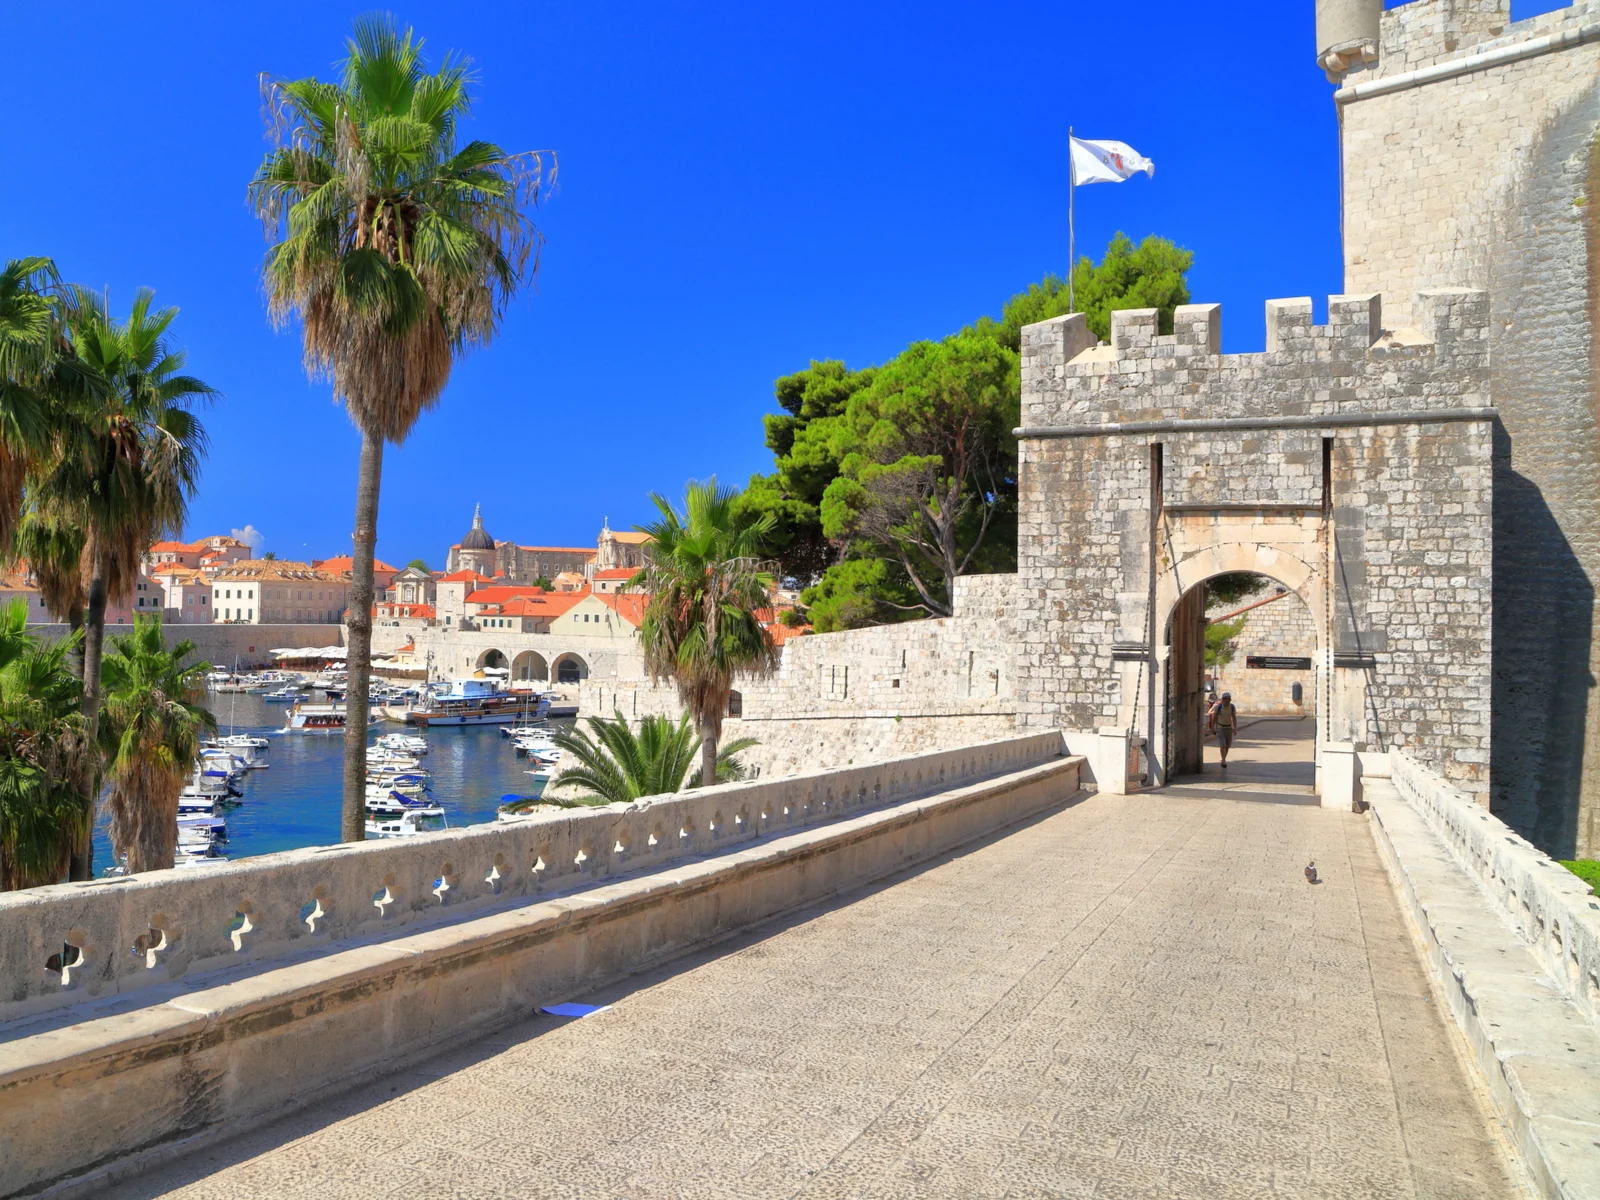 Cool view of Dubrovnik, one of the best things to do in Croatia, pictured during the day